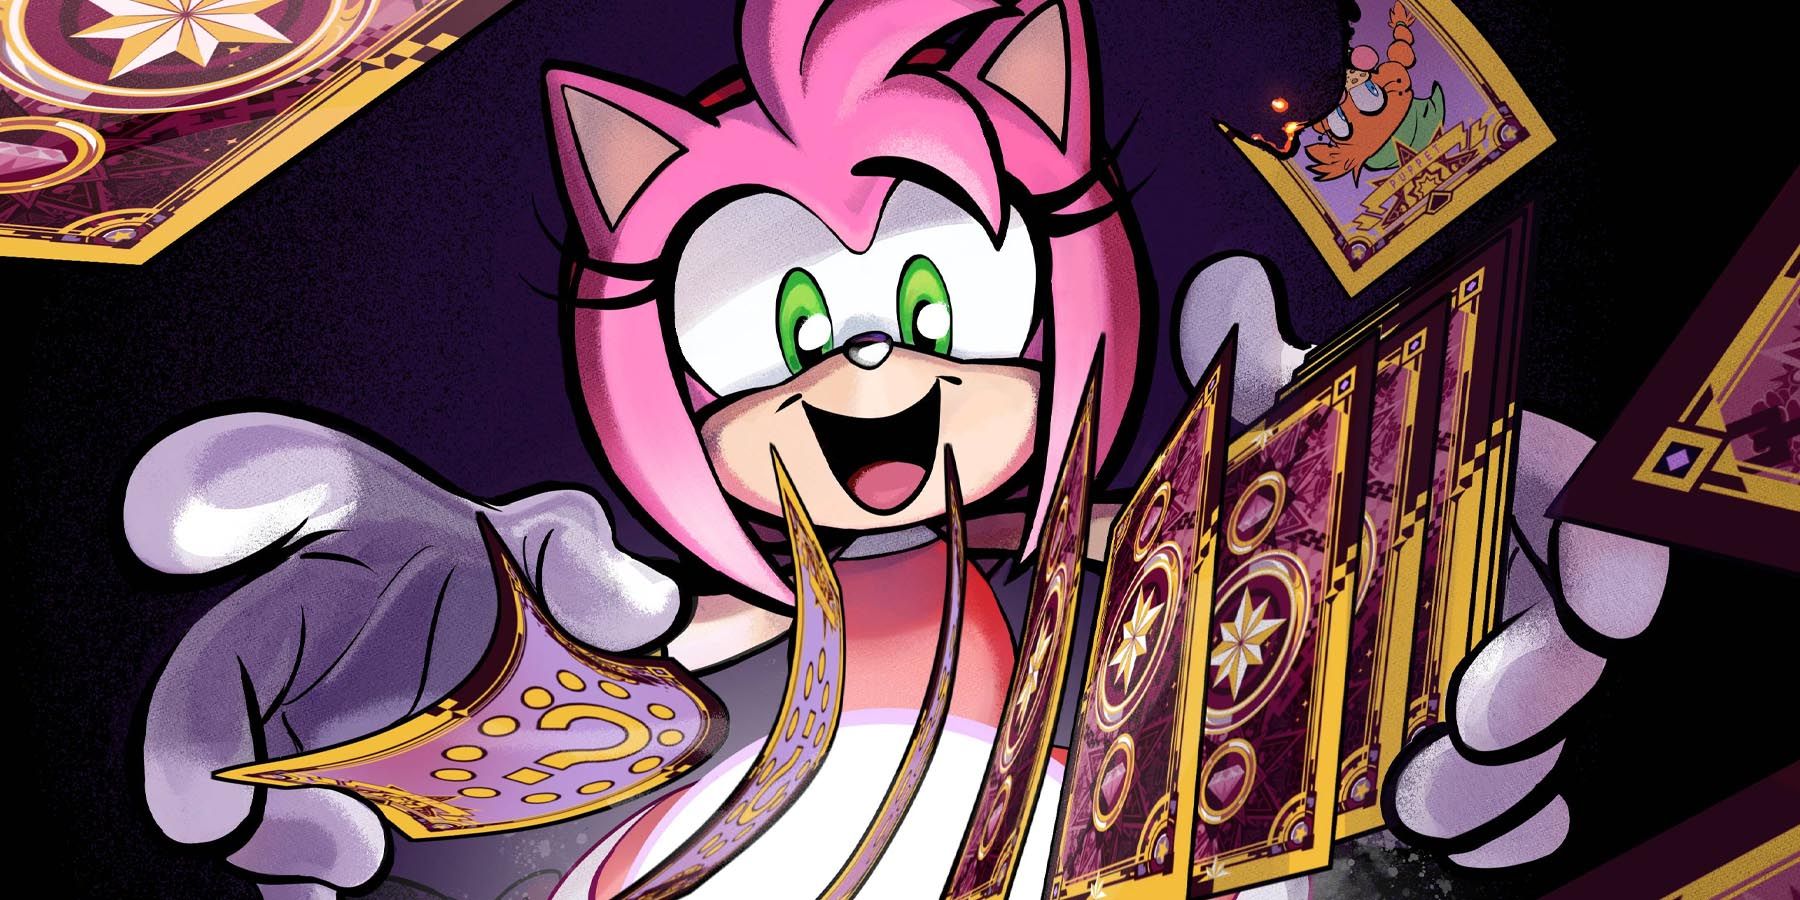 25 Facts About Amy Rose (Sonic The Hedgehog) 